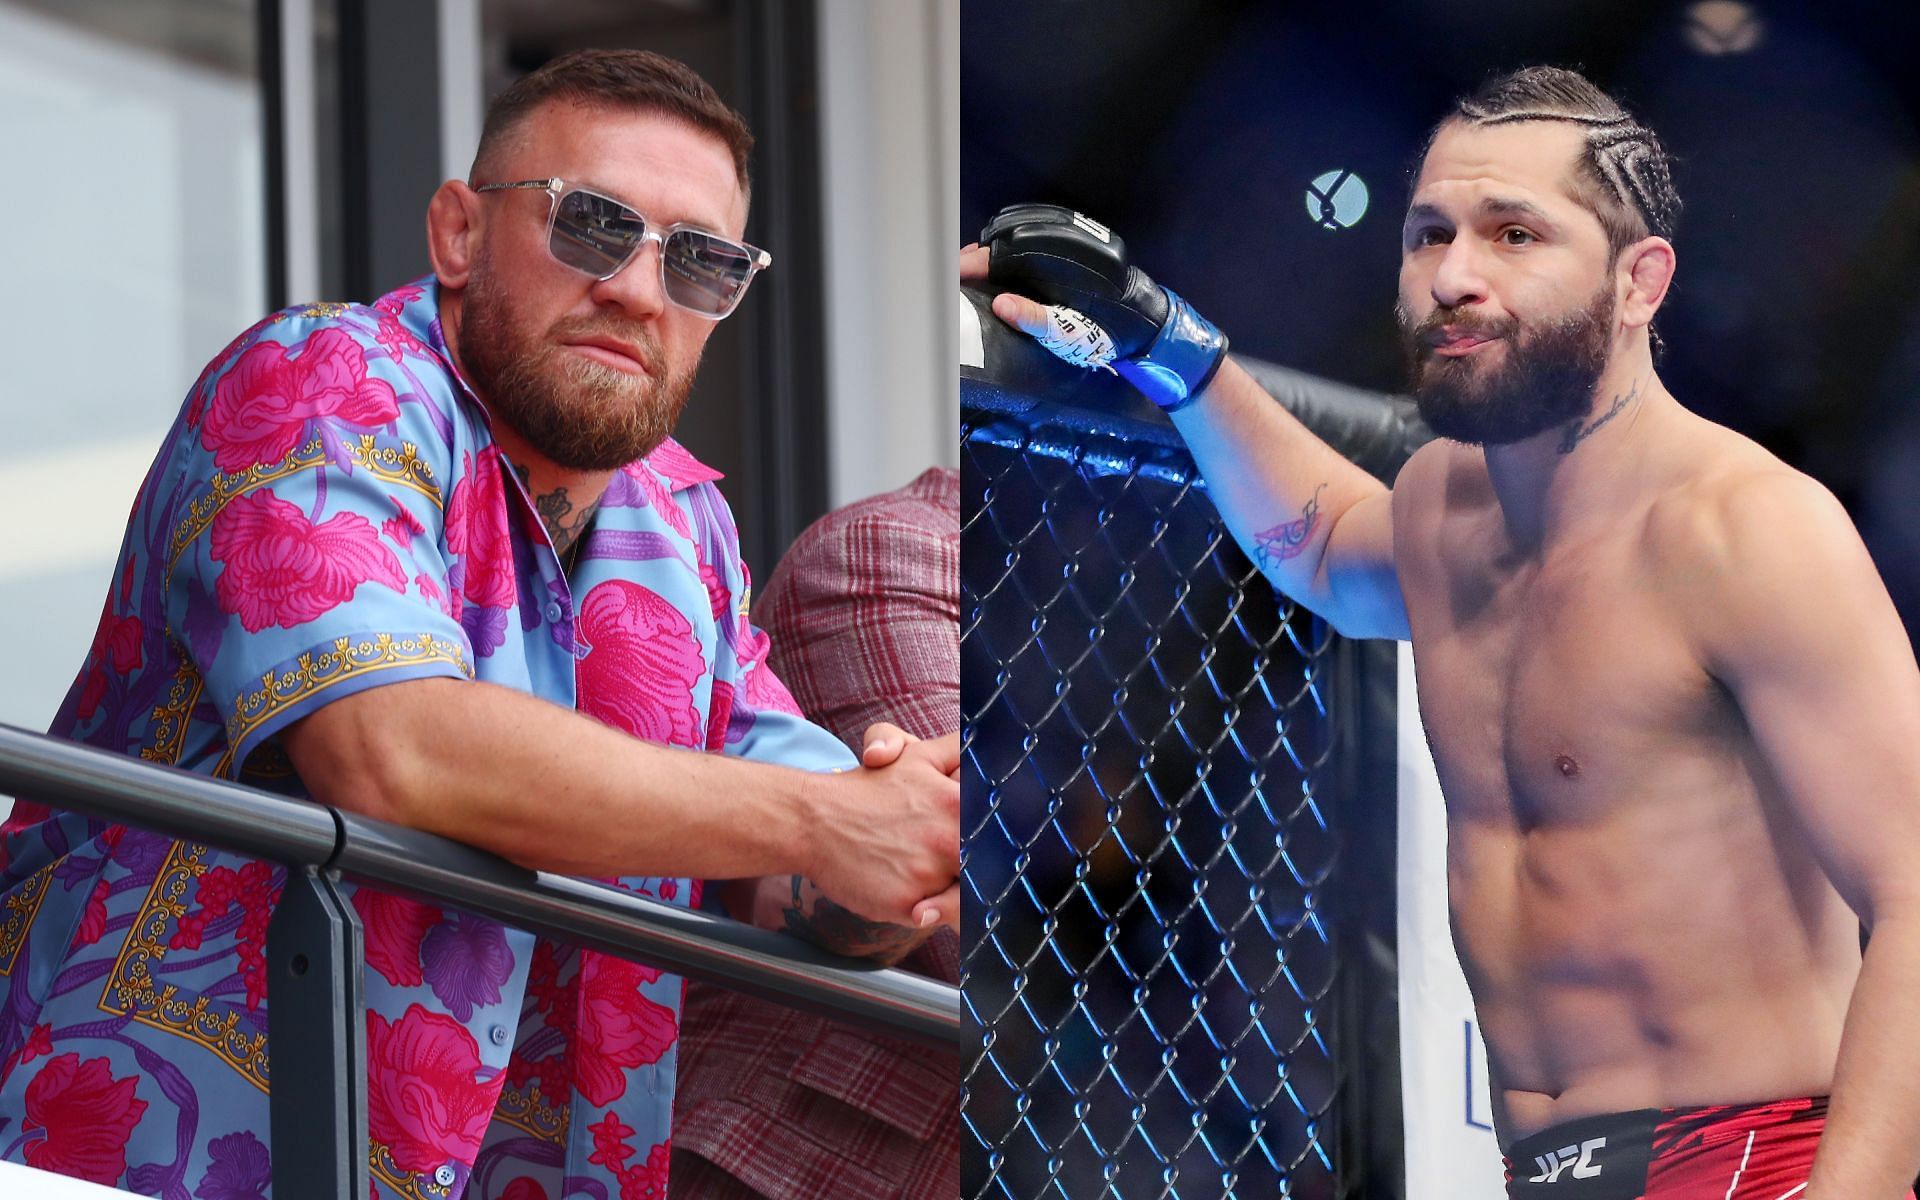 Conor McGregor (left) and Jorge Masvidal (right) (Images via Getty)